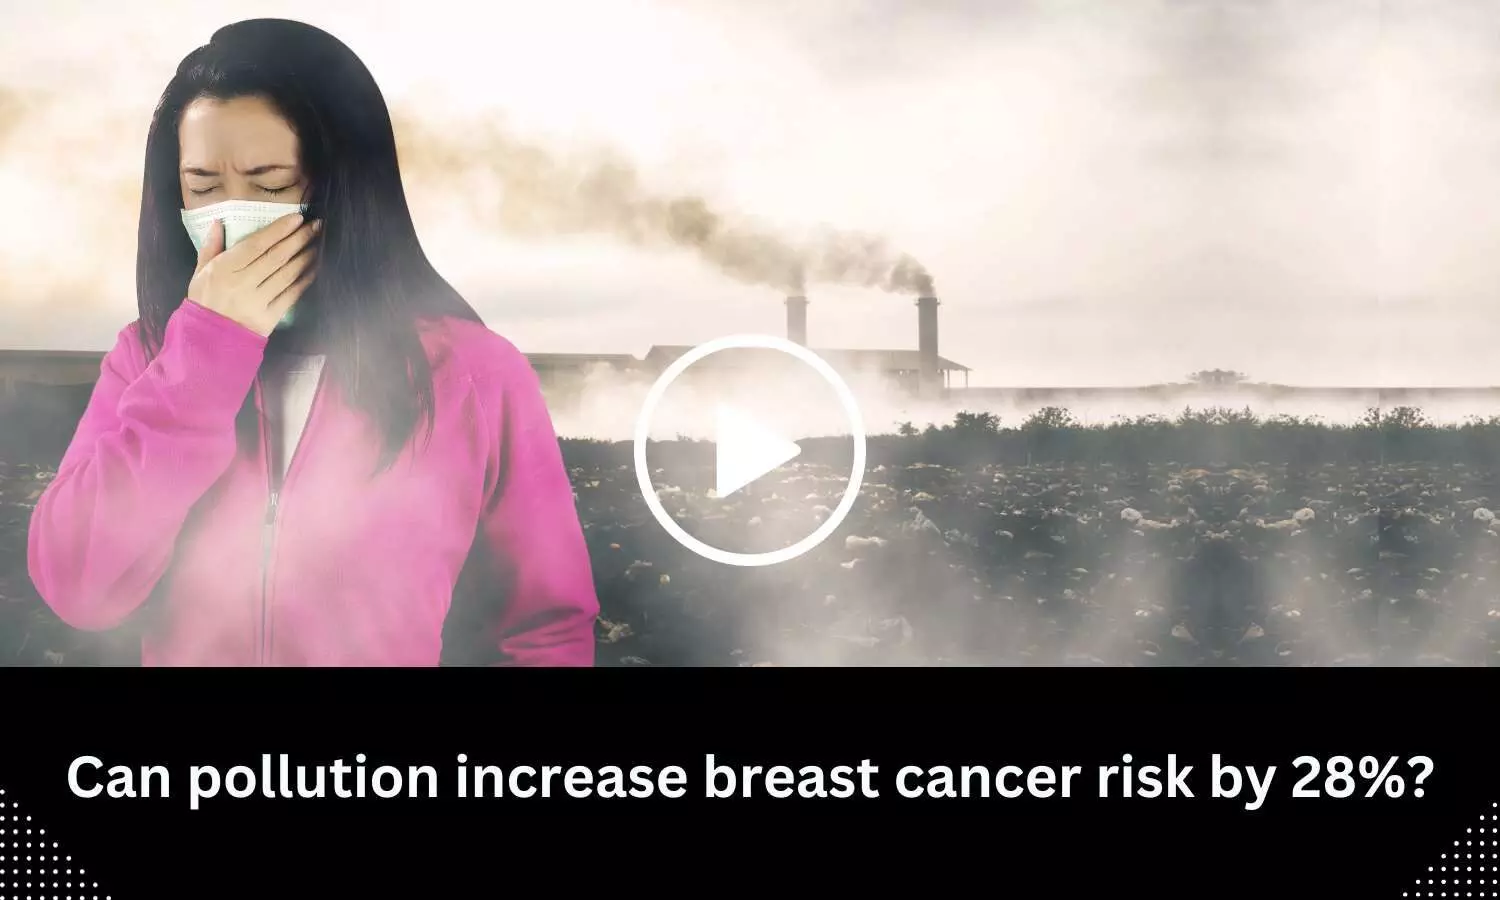 Can pollution increase breast cancer risk by 28%?